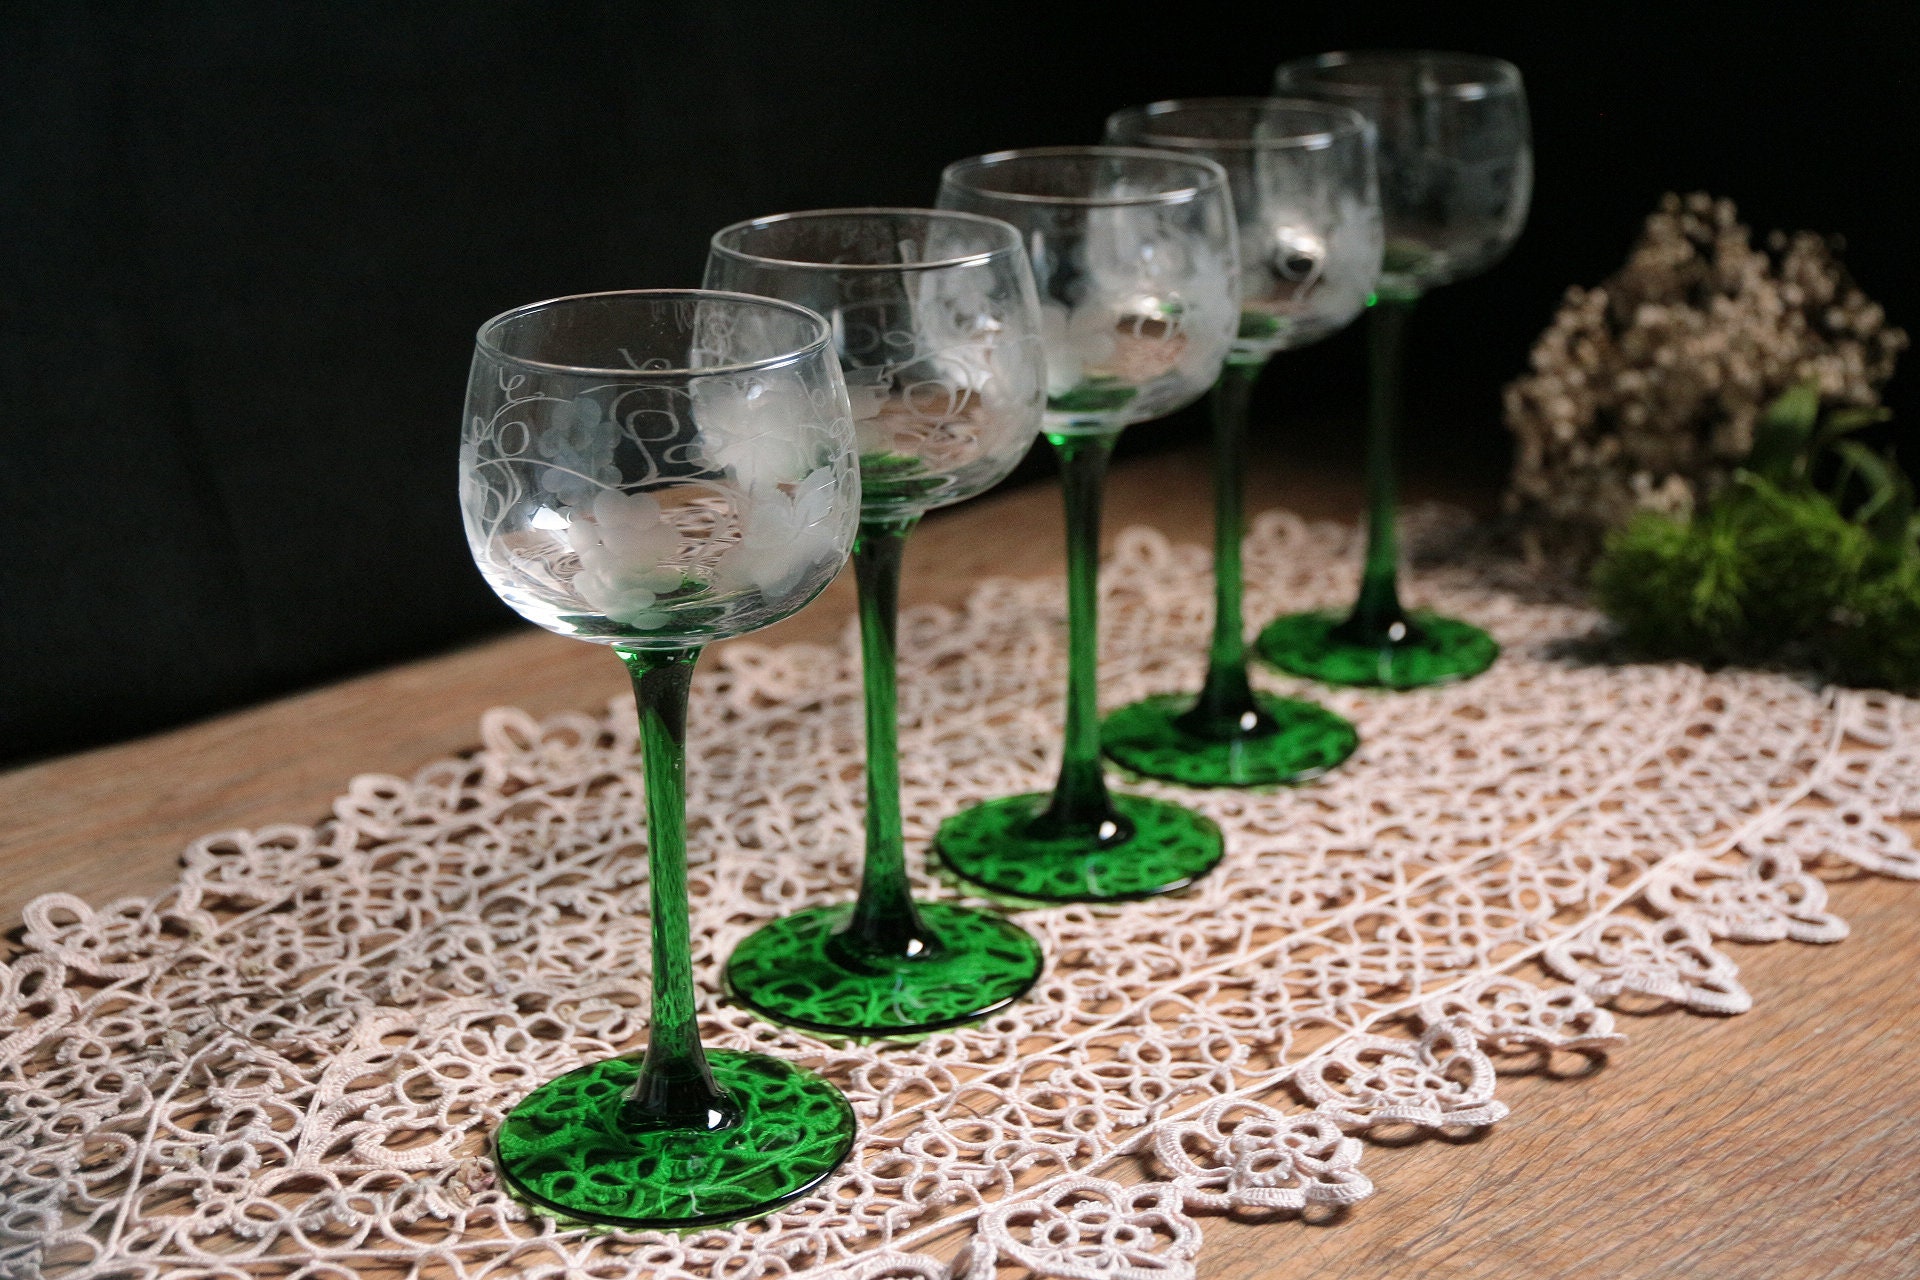 Set of 11 Alsace wine glasses with green stems – Chez Pluie